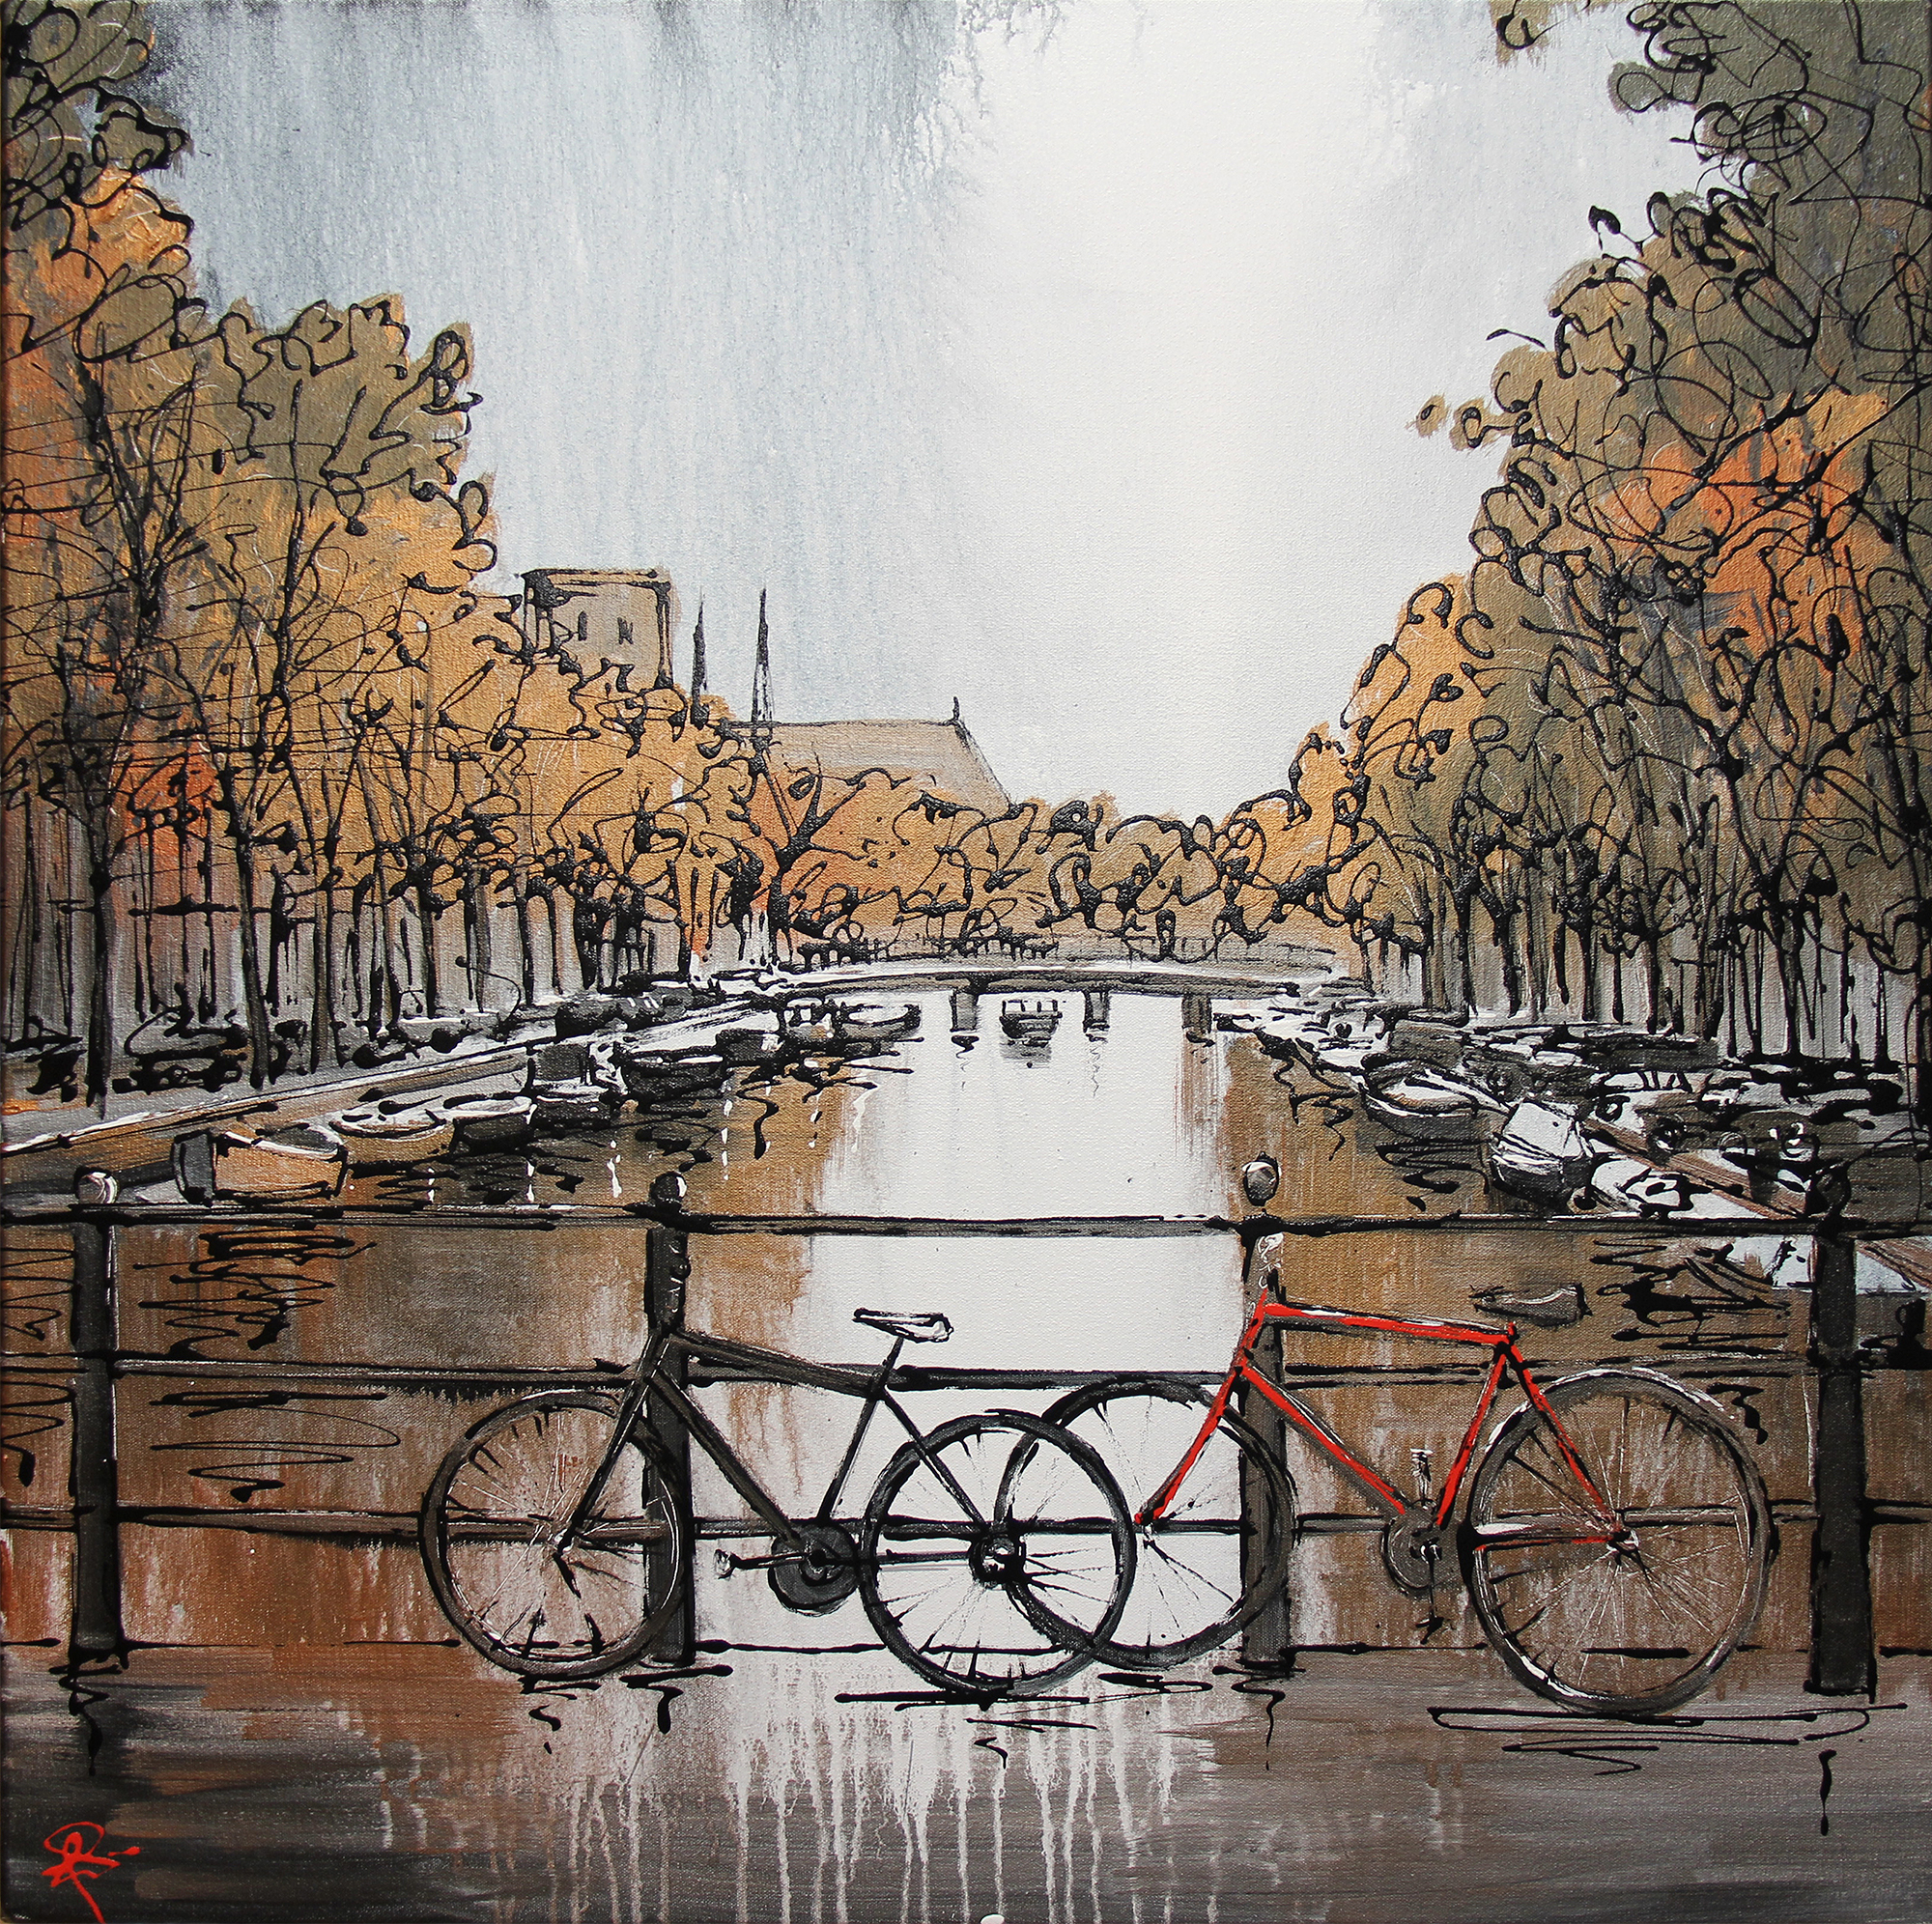 Pedalling Past by Paul Kenton, UK contemporary cityscape artist, an original painting of a canal in Amsterdam with bikes perched up